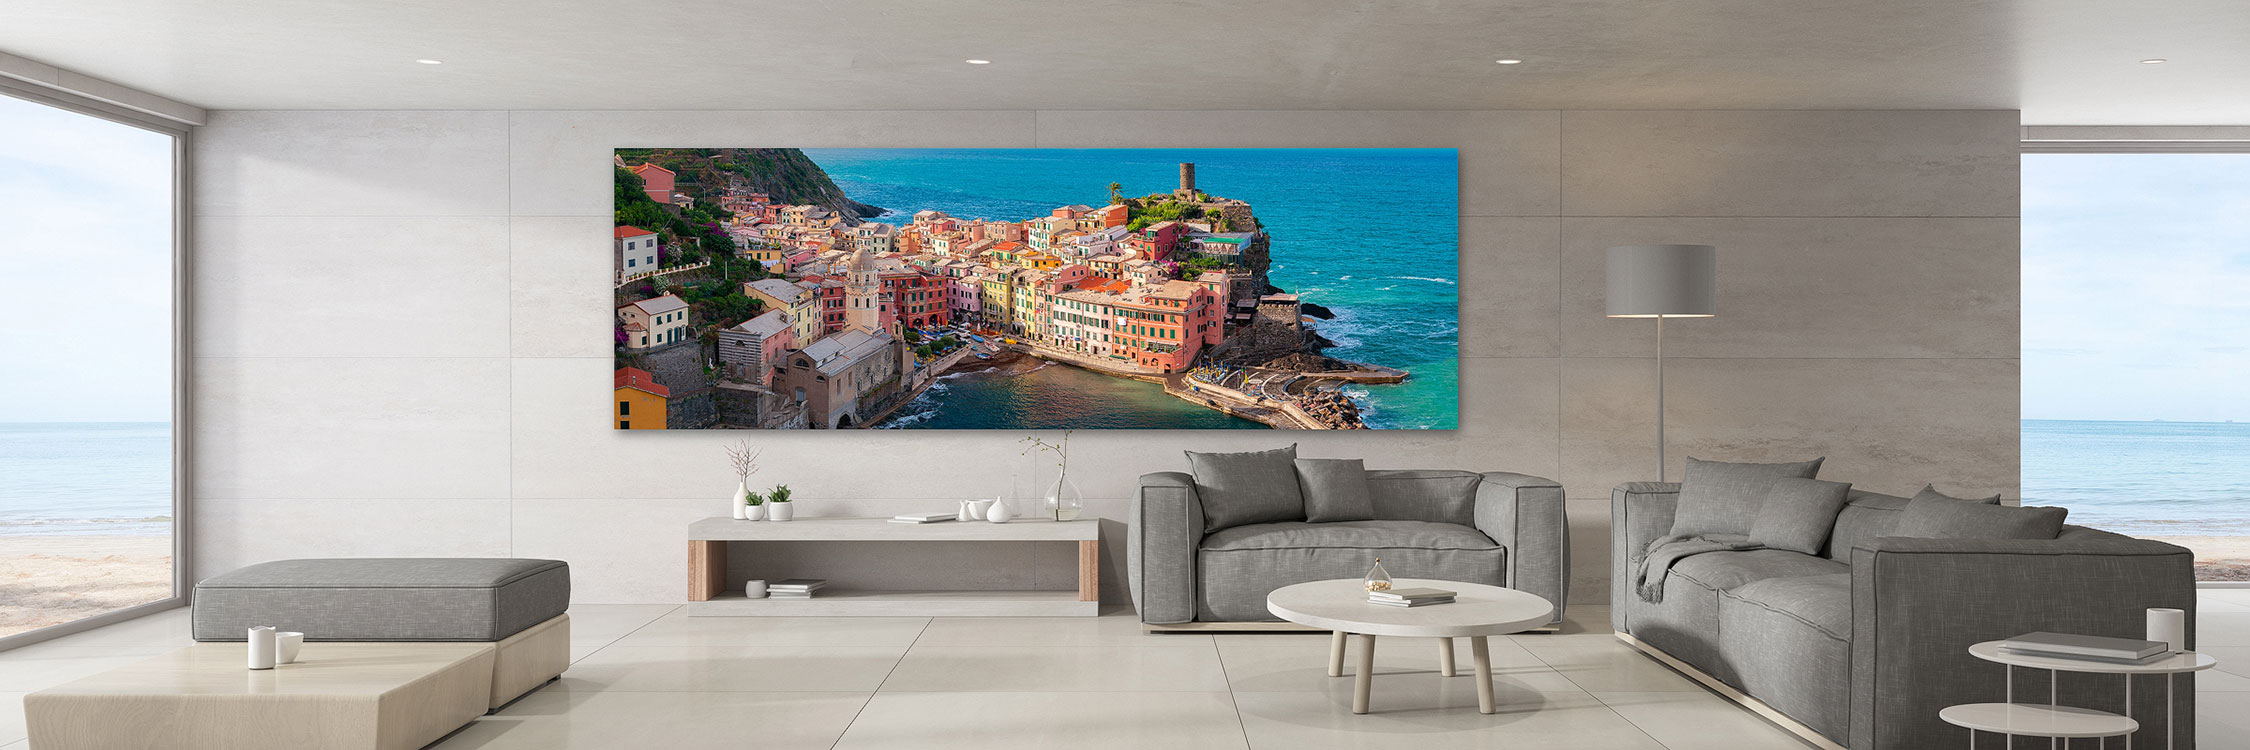 A gorgeous luxury wall art print decorates a beautiful modern living room with ocean view windows - Gintchin Fine Art